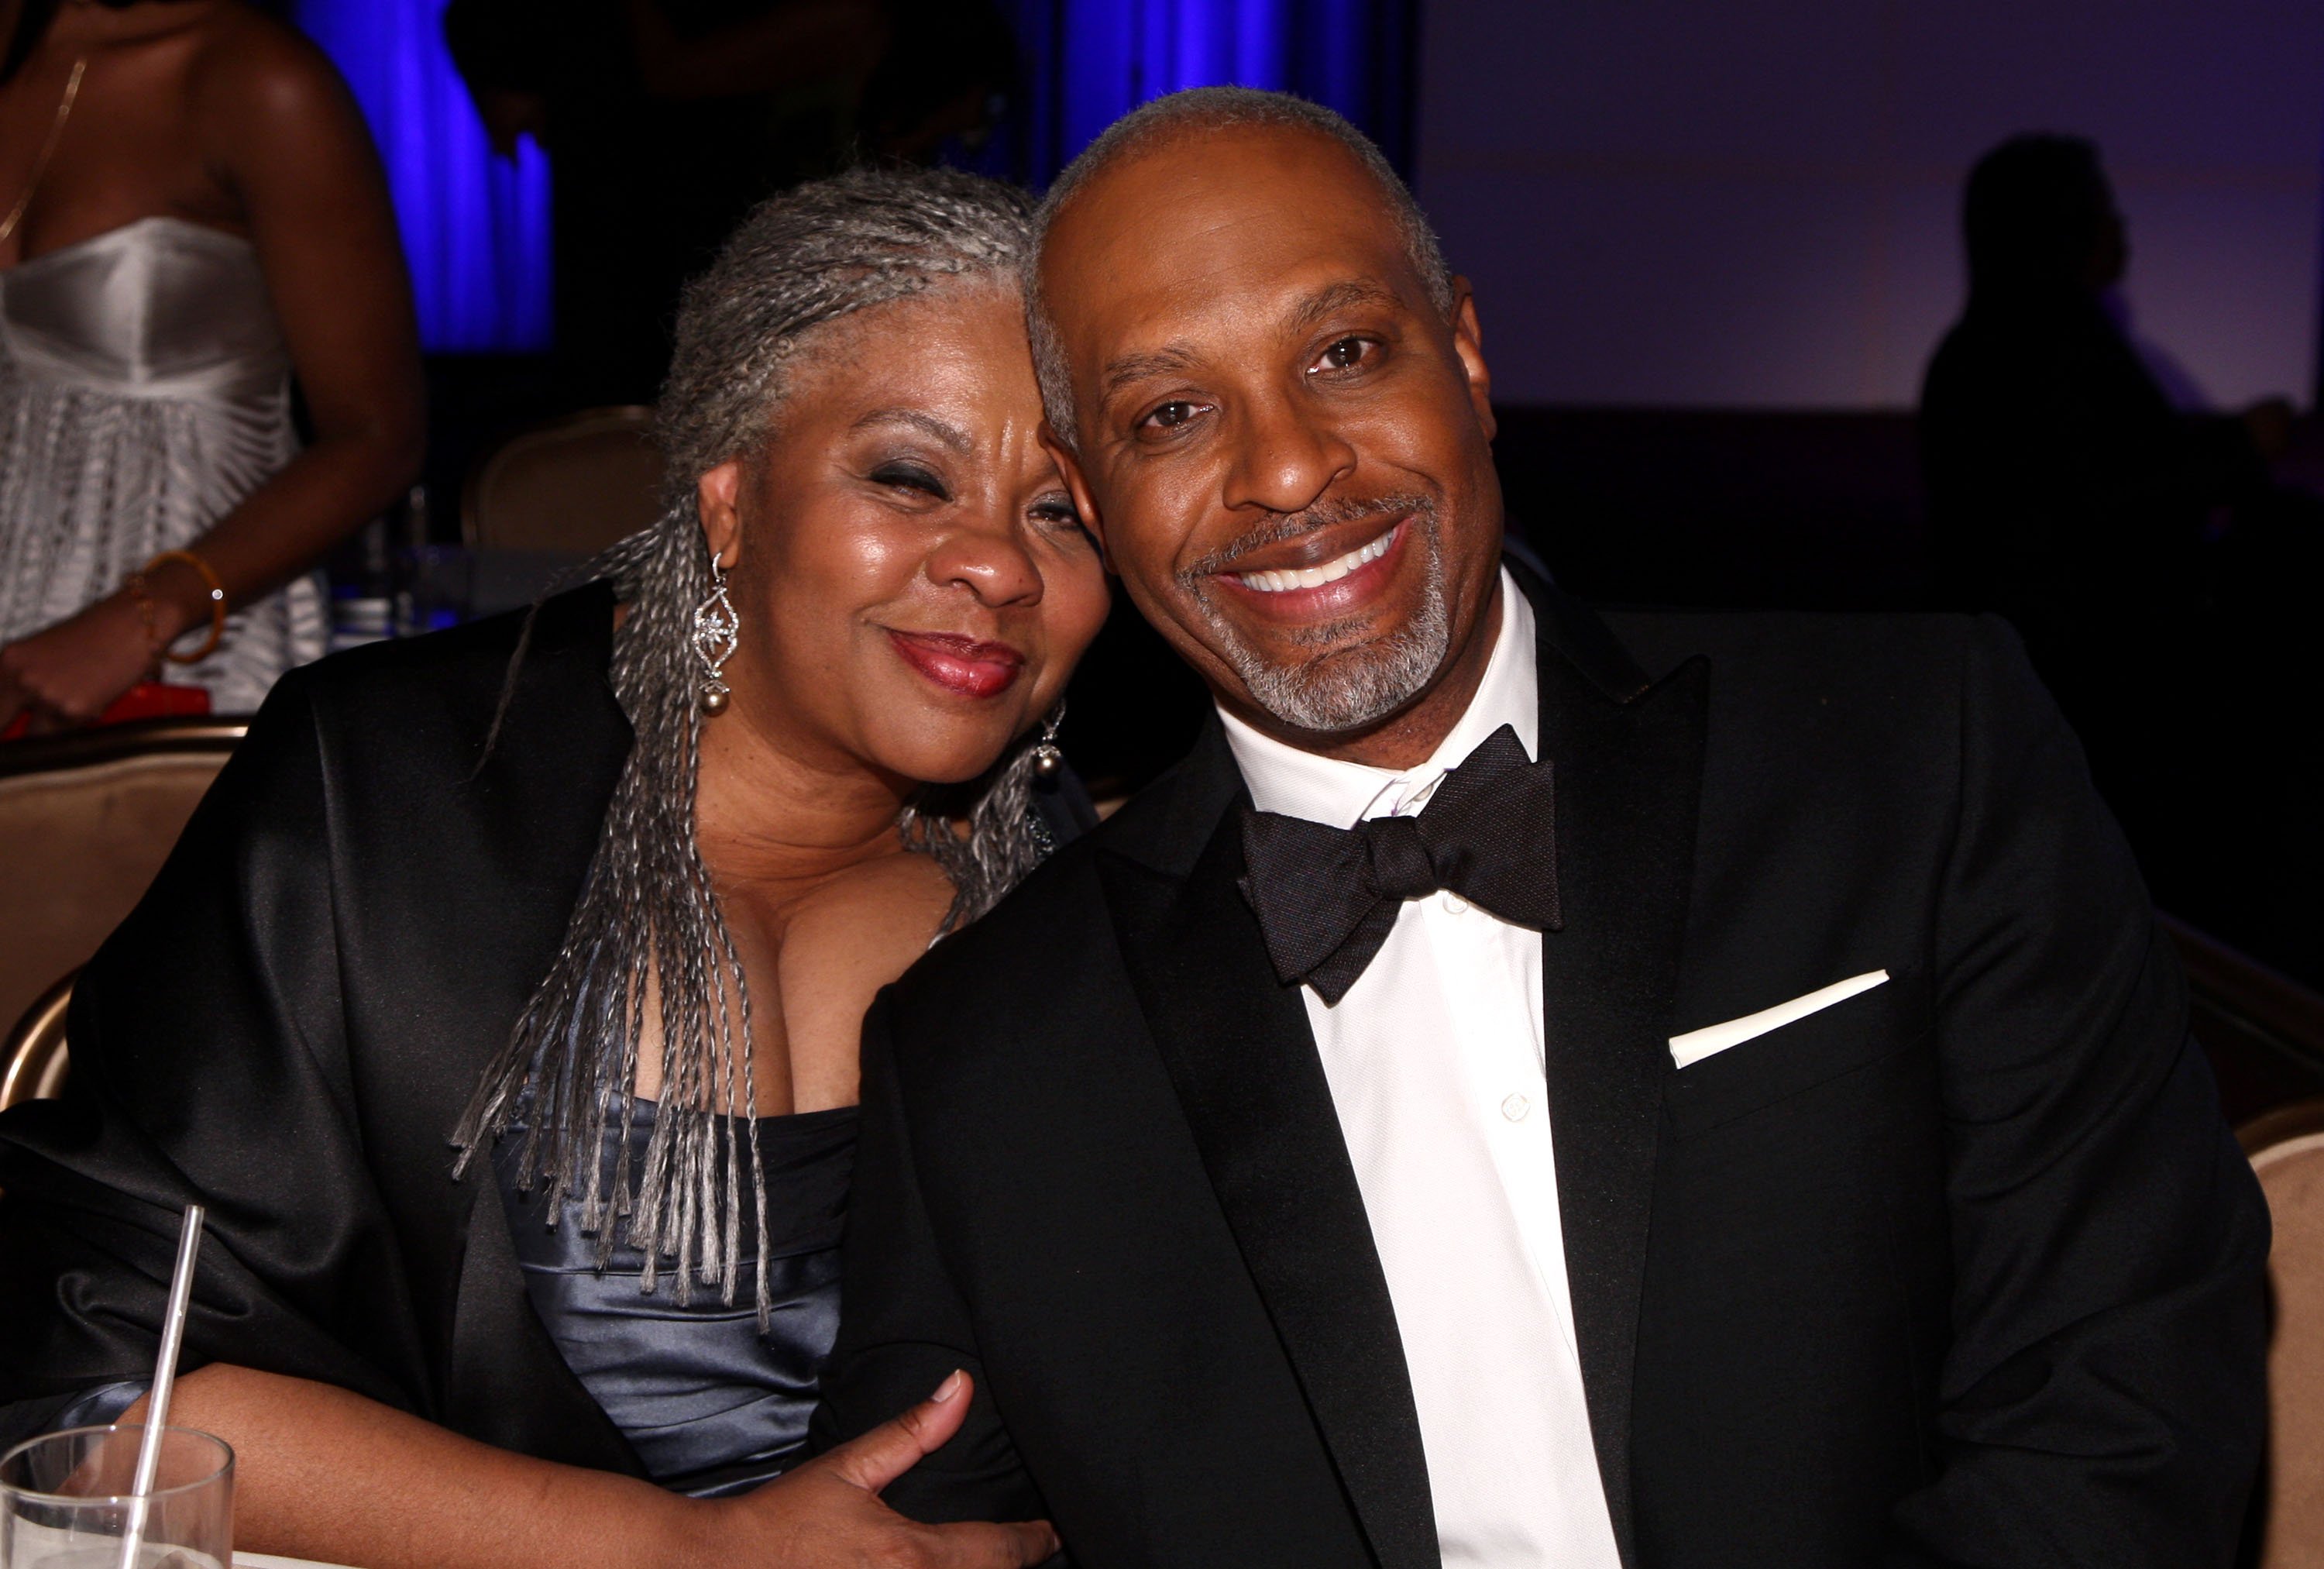 James Pickens Jr. and his wife Gina Pickens attend the 40th NAACP Image Awards after party at the Beverly Hilton Hotel in Los Angeles on February 12, 2009 | Photo: Getty Images